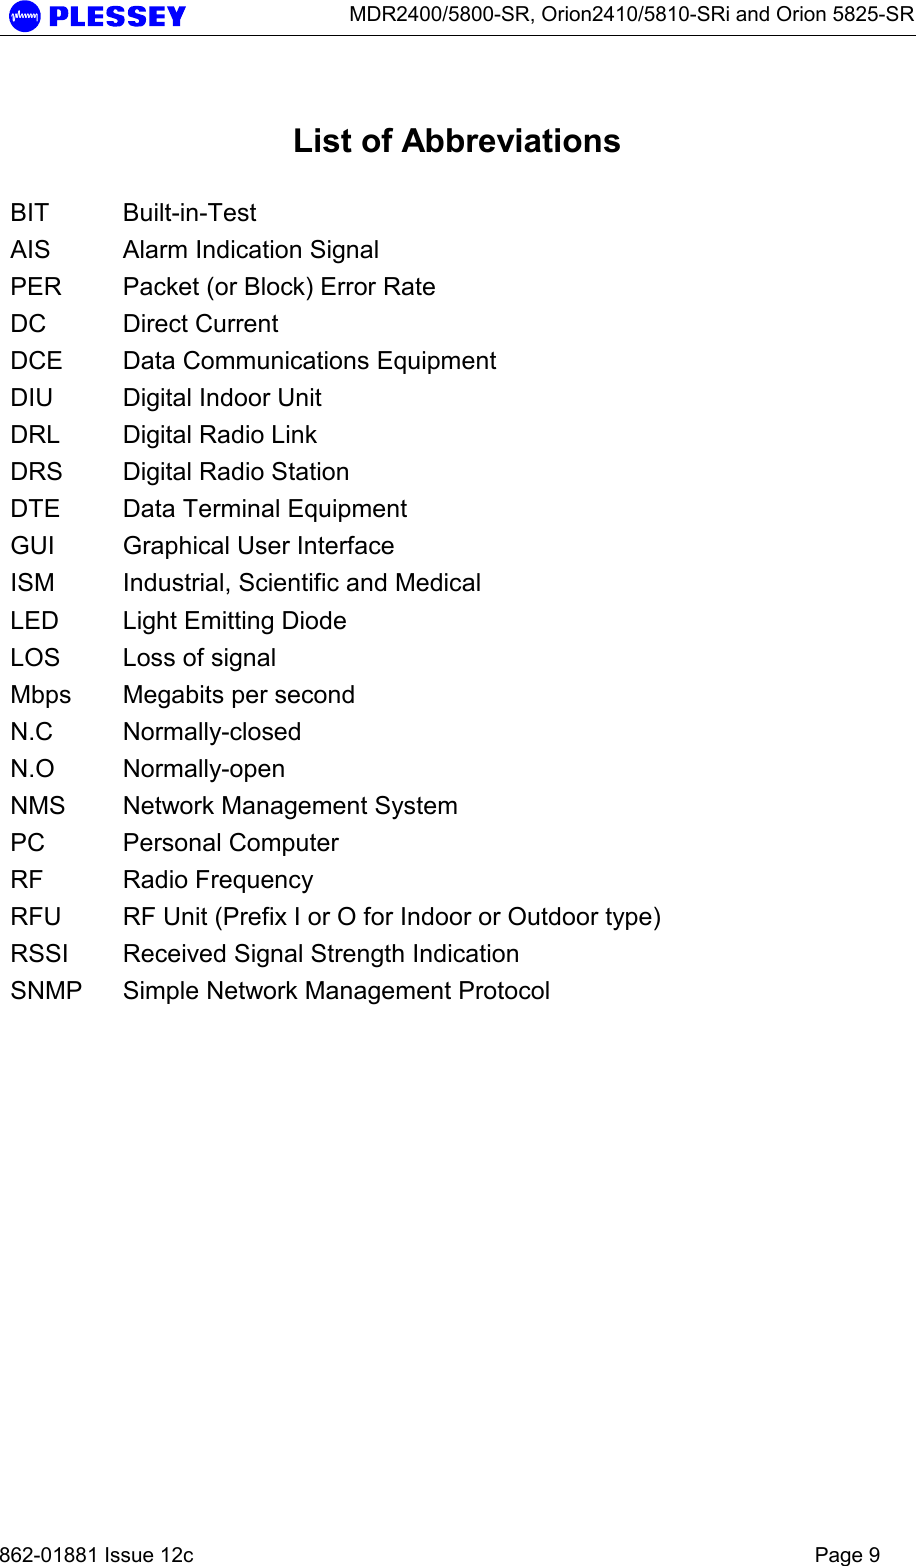      MDR2400/5800-SR, Orion2410/5810-SRi and Orion 5825-SR   862-01881 Issue 12c    Page 9  List of Abbreviations  BIT Built-in-Test AIS  Alarm Indication Signal PER  Packet (or Block) Error Rate DC Direct Current DCE  Data Communications Equipment DIU  Digital Indoor Unit DRL  Digital Radio Link DRS  Digital Radio Station DTE  Data Terminal Equipment GUI  Graphical User Interface ISM  Industrial, Scientific and Medical LED  Light Emitting Diode LOS  Loss of signal Mbps  Megabits per second N.C Normally-closed N.O Normally-open NMS  Network Management System PC Personal Computer RF Radio Frequency RFU  RF Unit (Prefix I or O for Indoor or Outdoor type) RSSI  Received Signal Strength Indication SNMP  Simple Network Management Protocol  